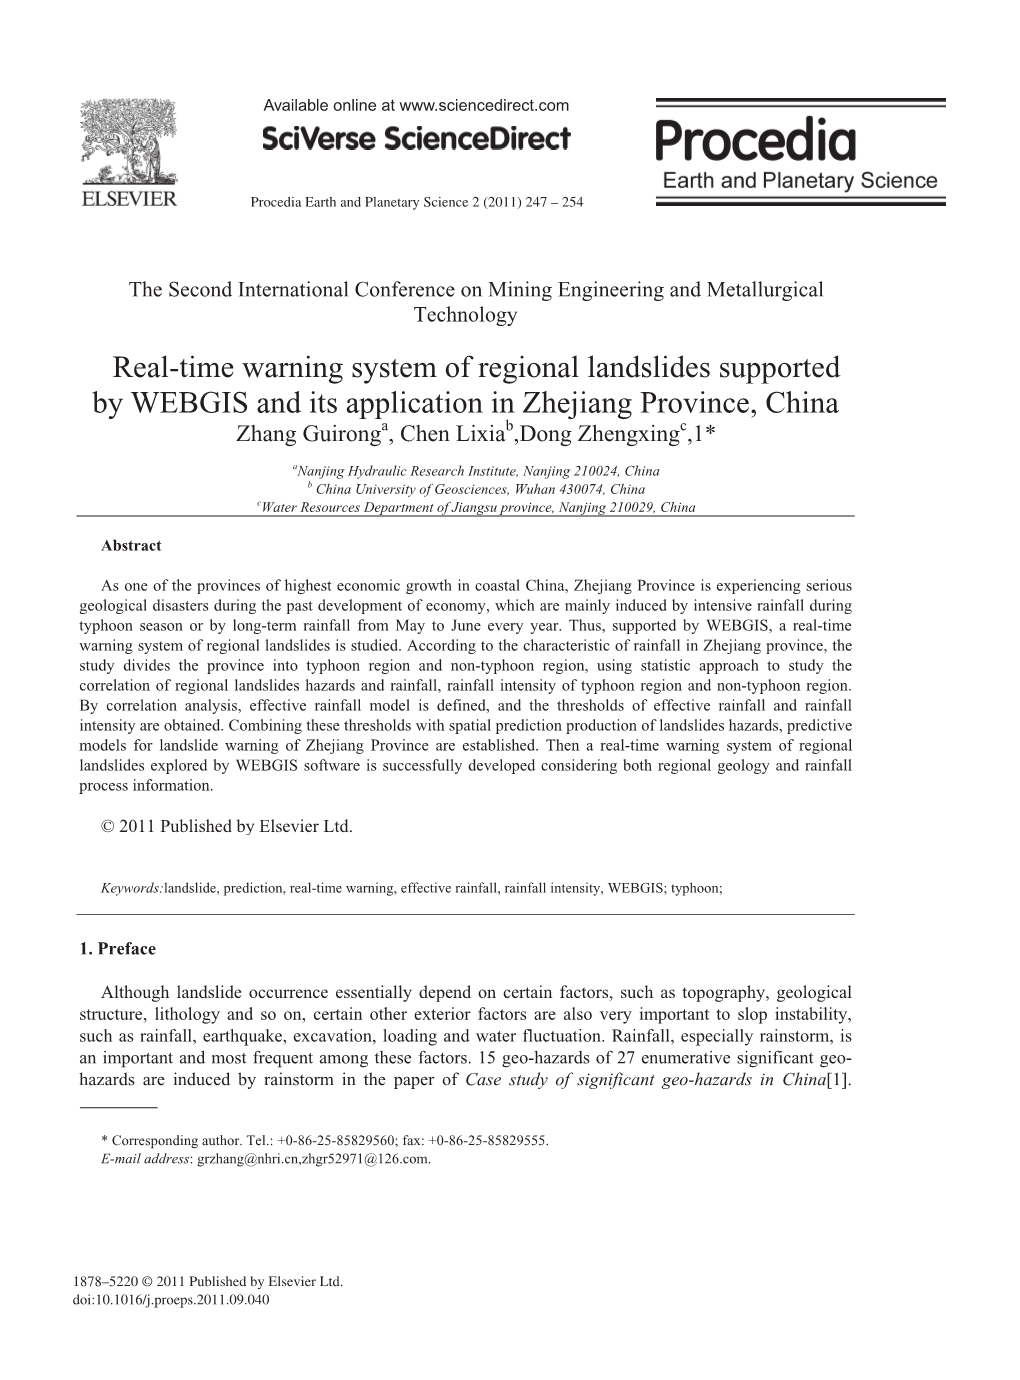 Real-Time Warning System of Regional Landslides Supported by WEBGIS and Its Application in Zhejiang Province, China Zhang Guironga, Chen Lixiab,Dong Zhengxingc,1*